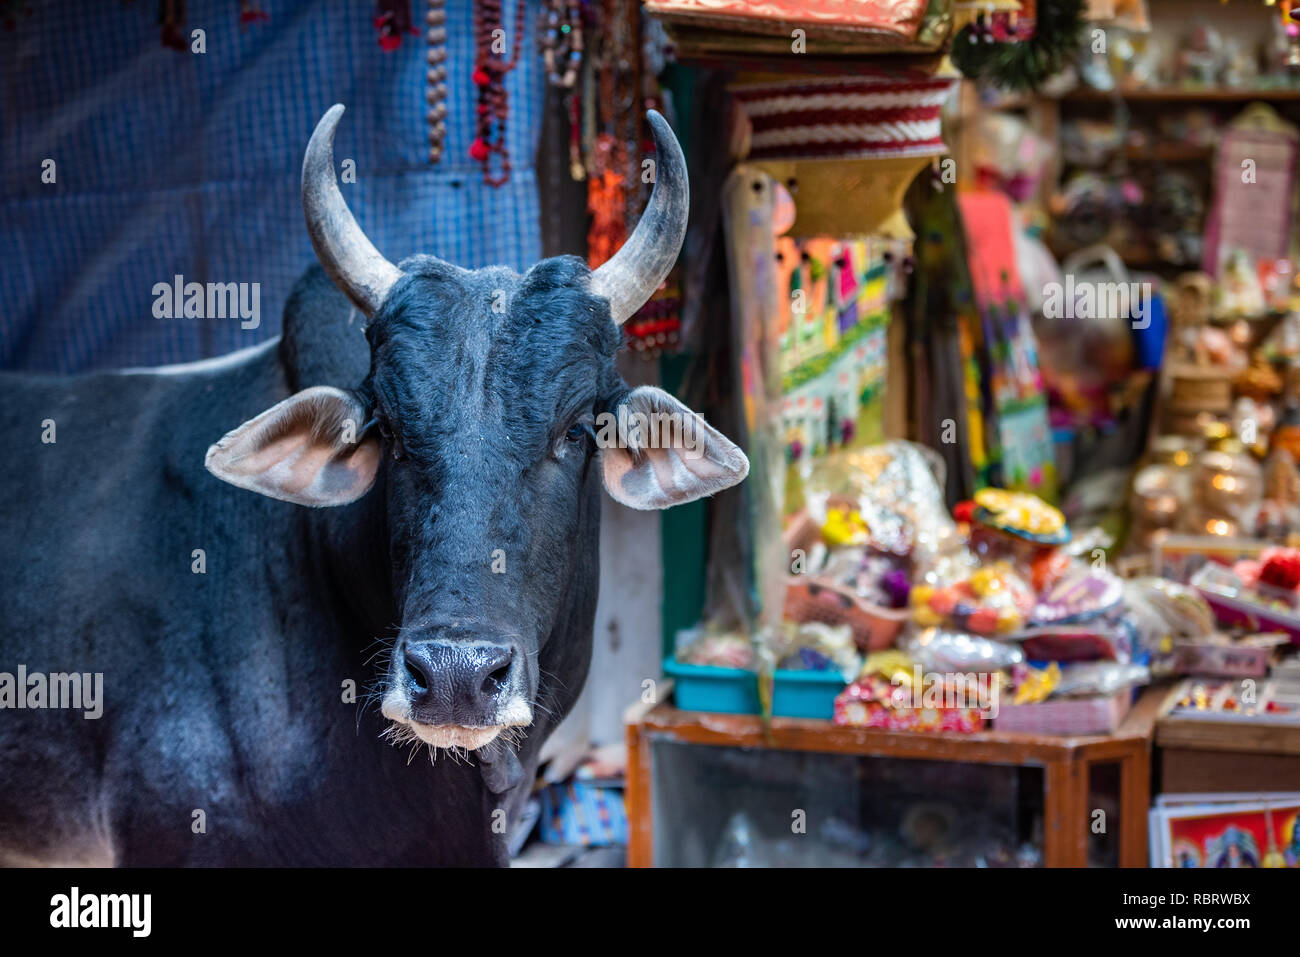 A cow looks on adjacent to a souvenir shop in the narrow lanes near Kashi Vishwanath temple in Varanasi India. Stock Photo